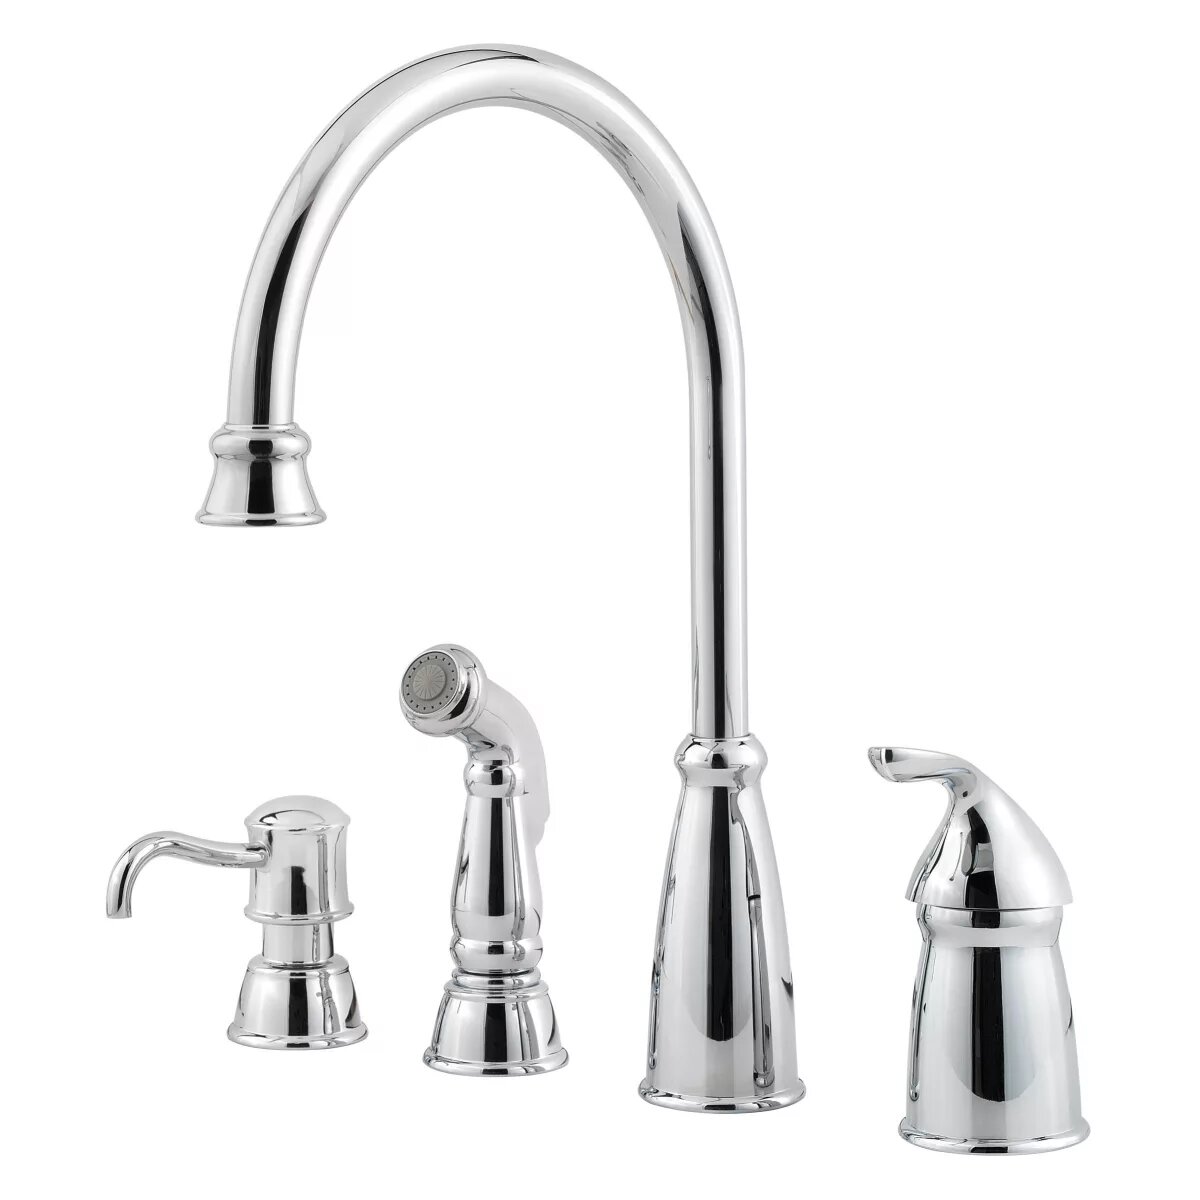 PFISTER GT26-4CB AVALON 13 7/8 INCH SINGLE LEVER HANDLE DECK MOUNT KITCHEN FAUCET WITH SIDE SPRAY AND SOAP DISPENSER